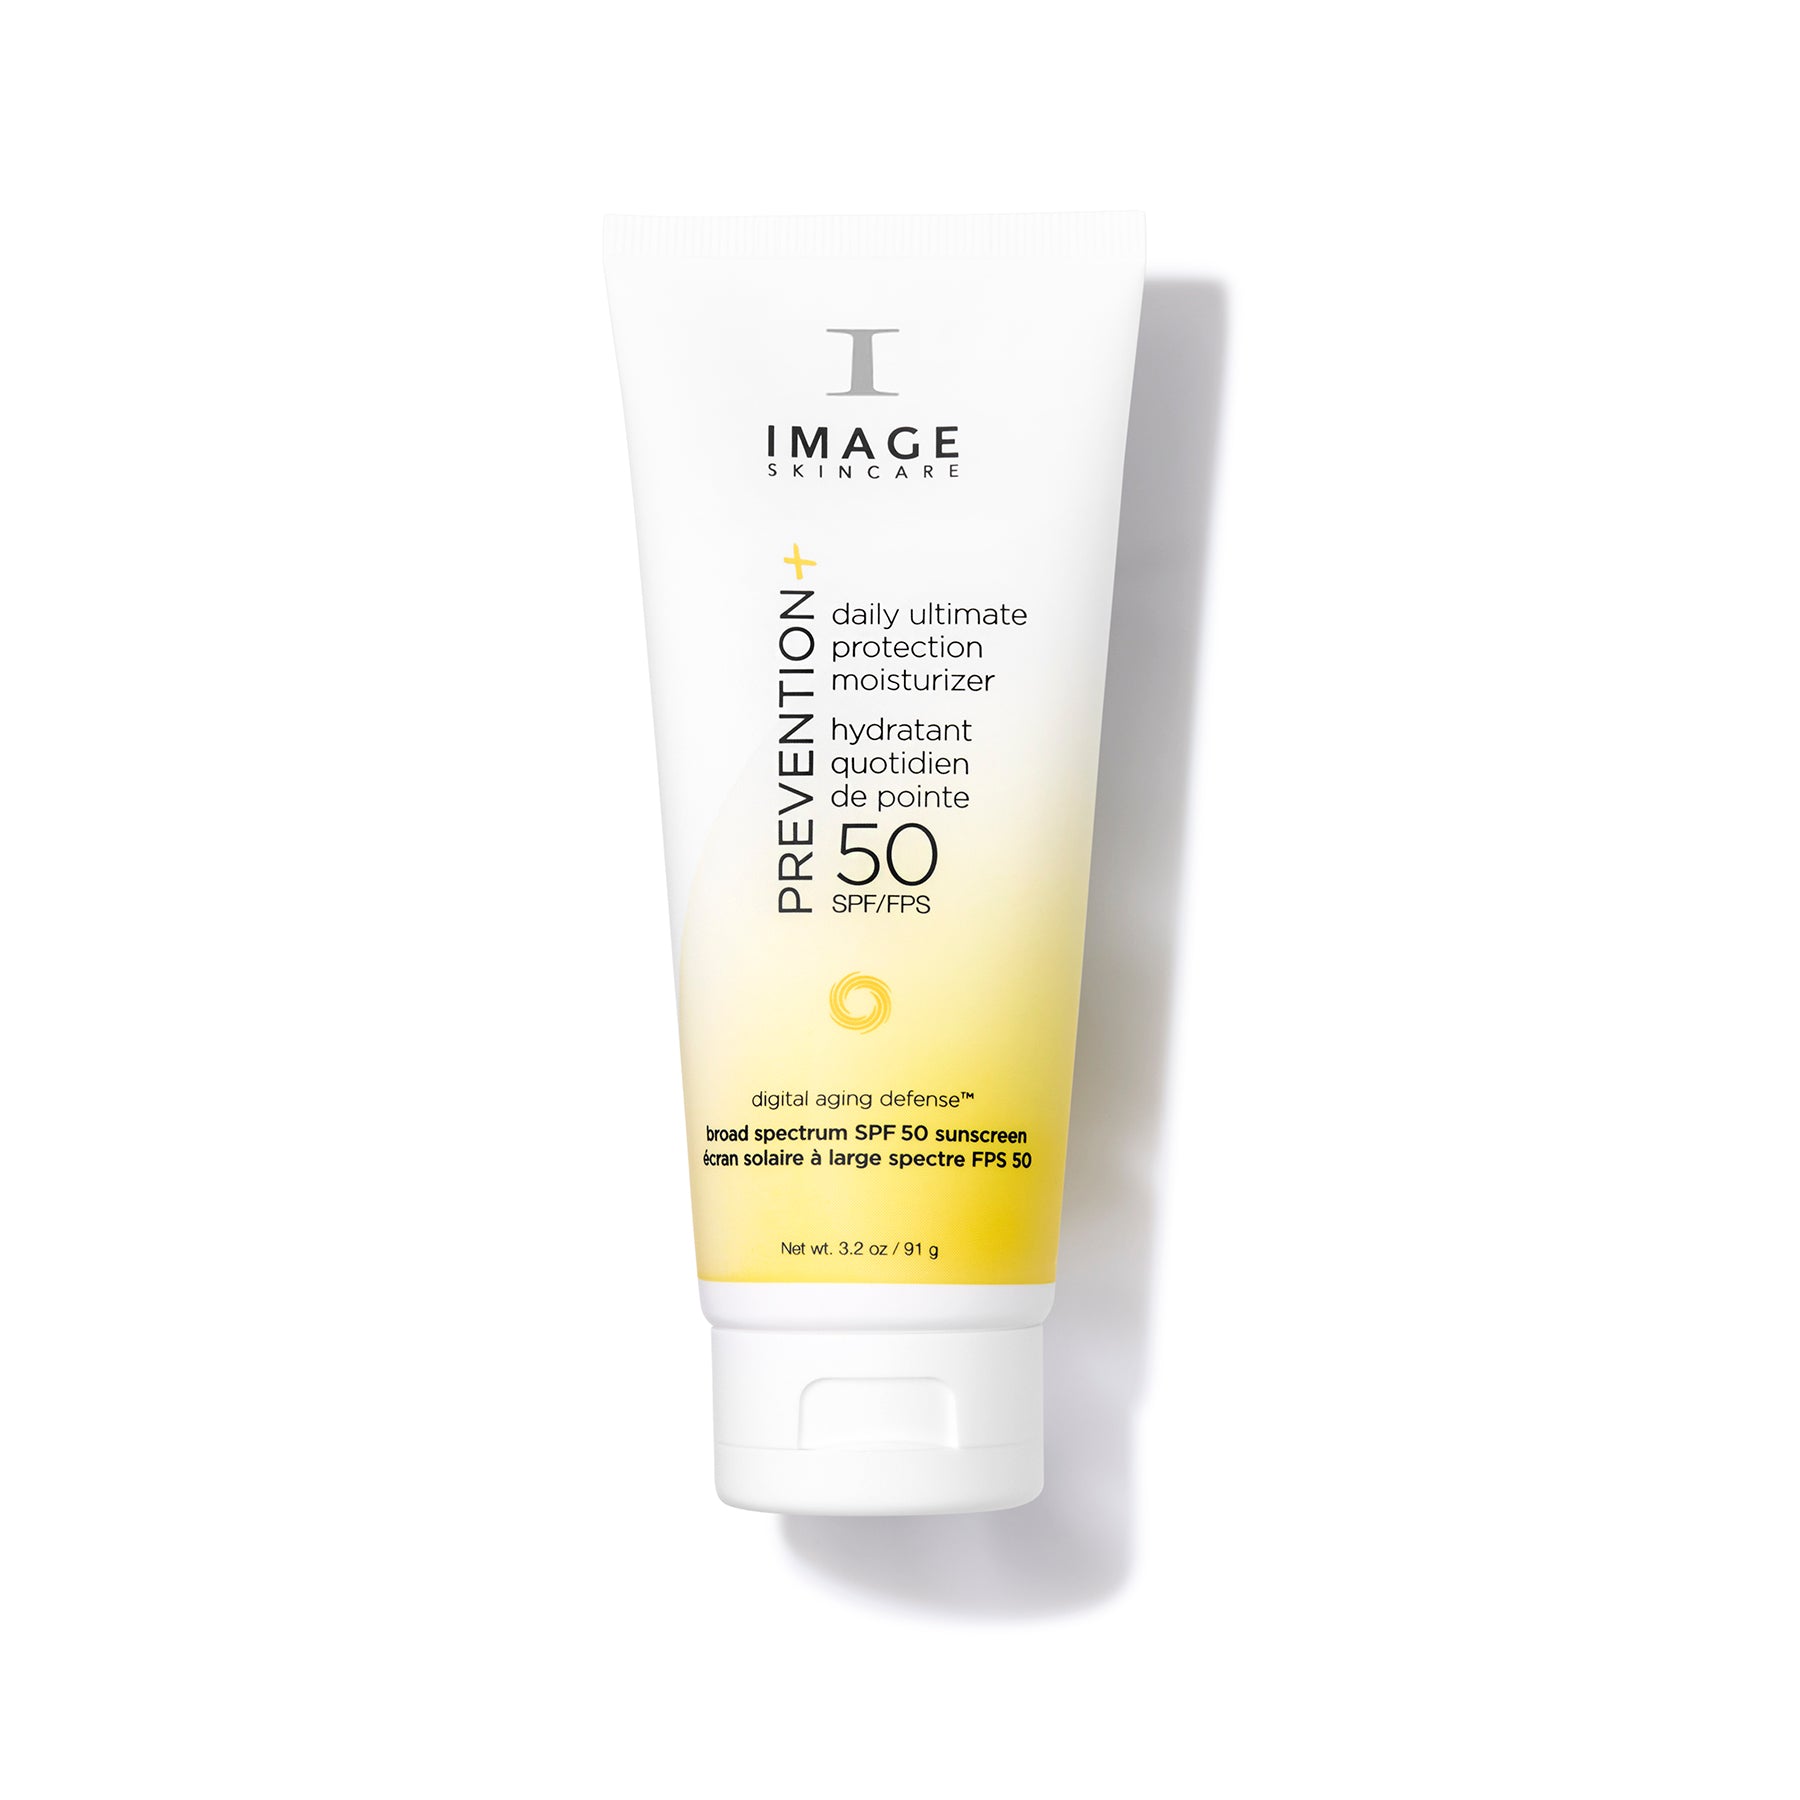 Image Skincare Prevention+ Daily Ultimate Protection Moisturizer SPF 50 Shop At Exclusive Beauty